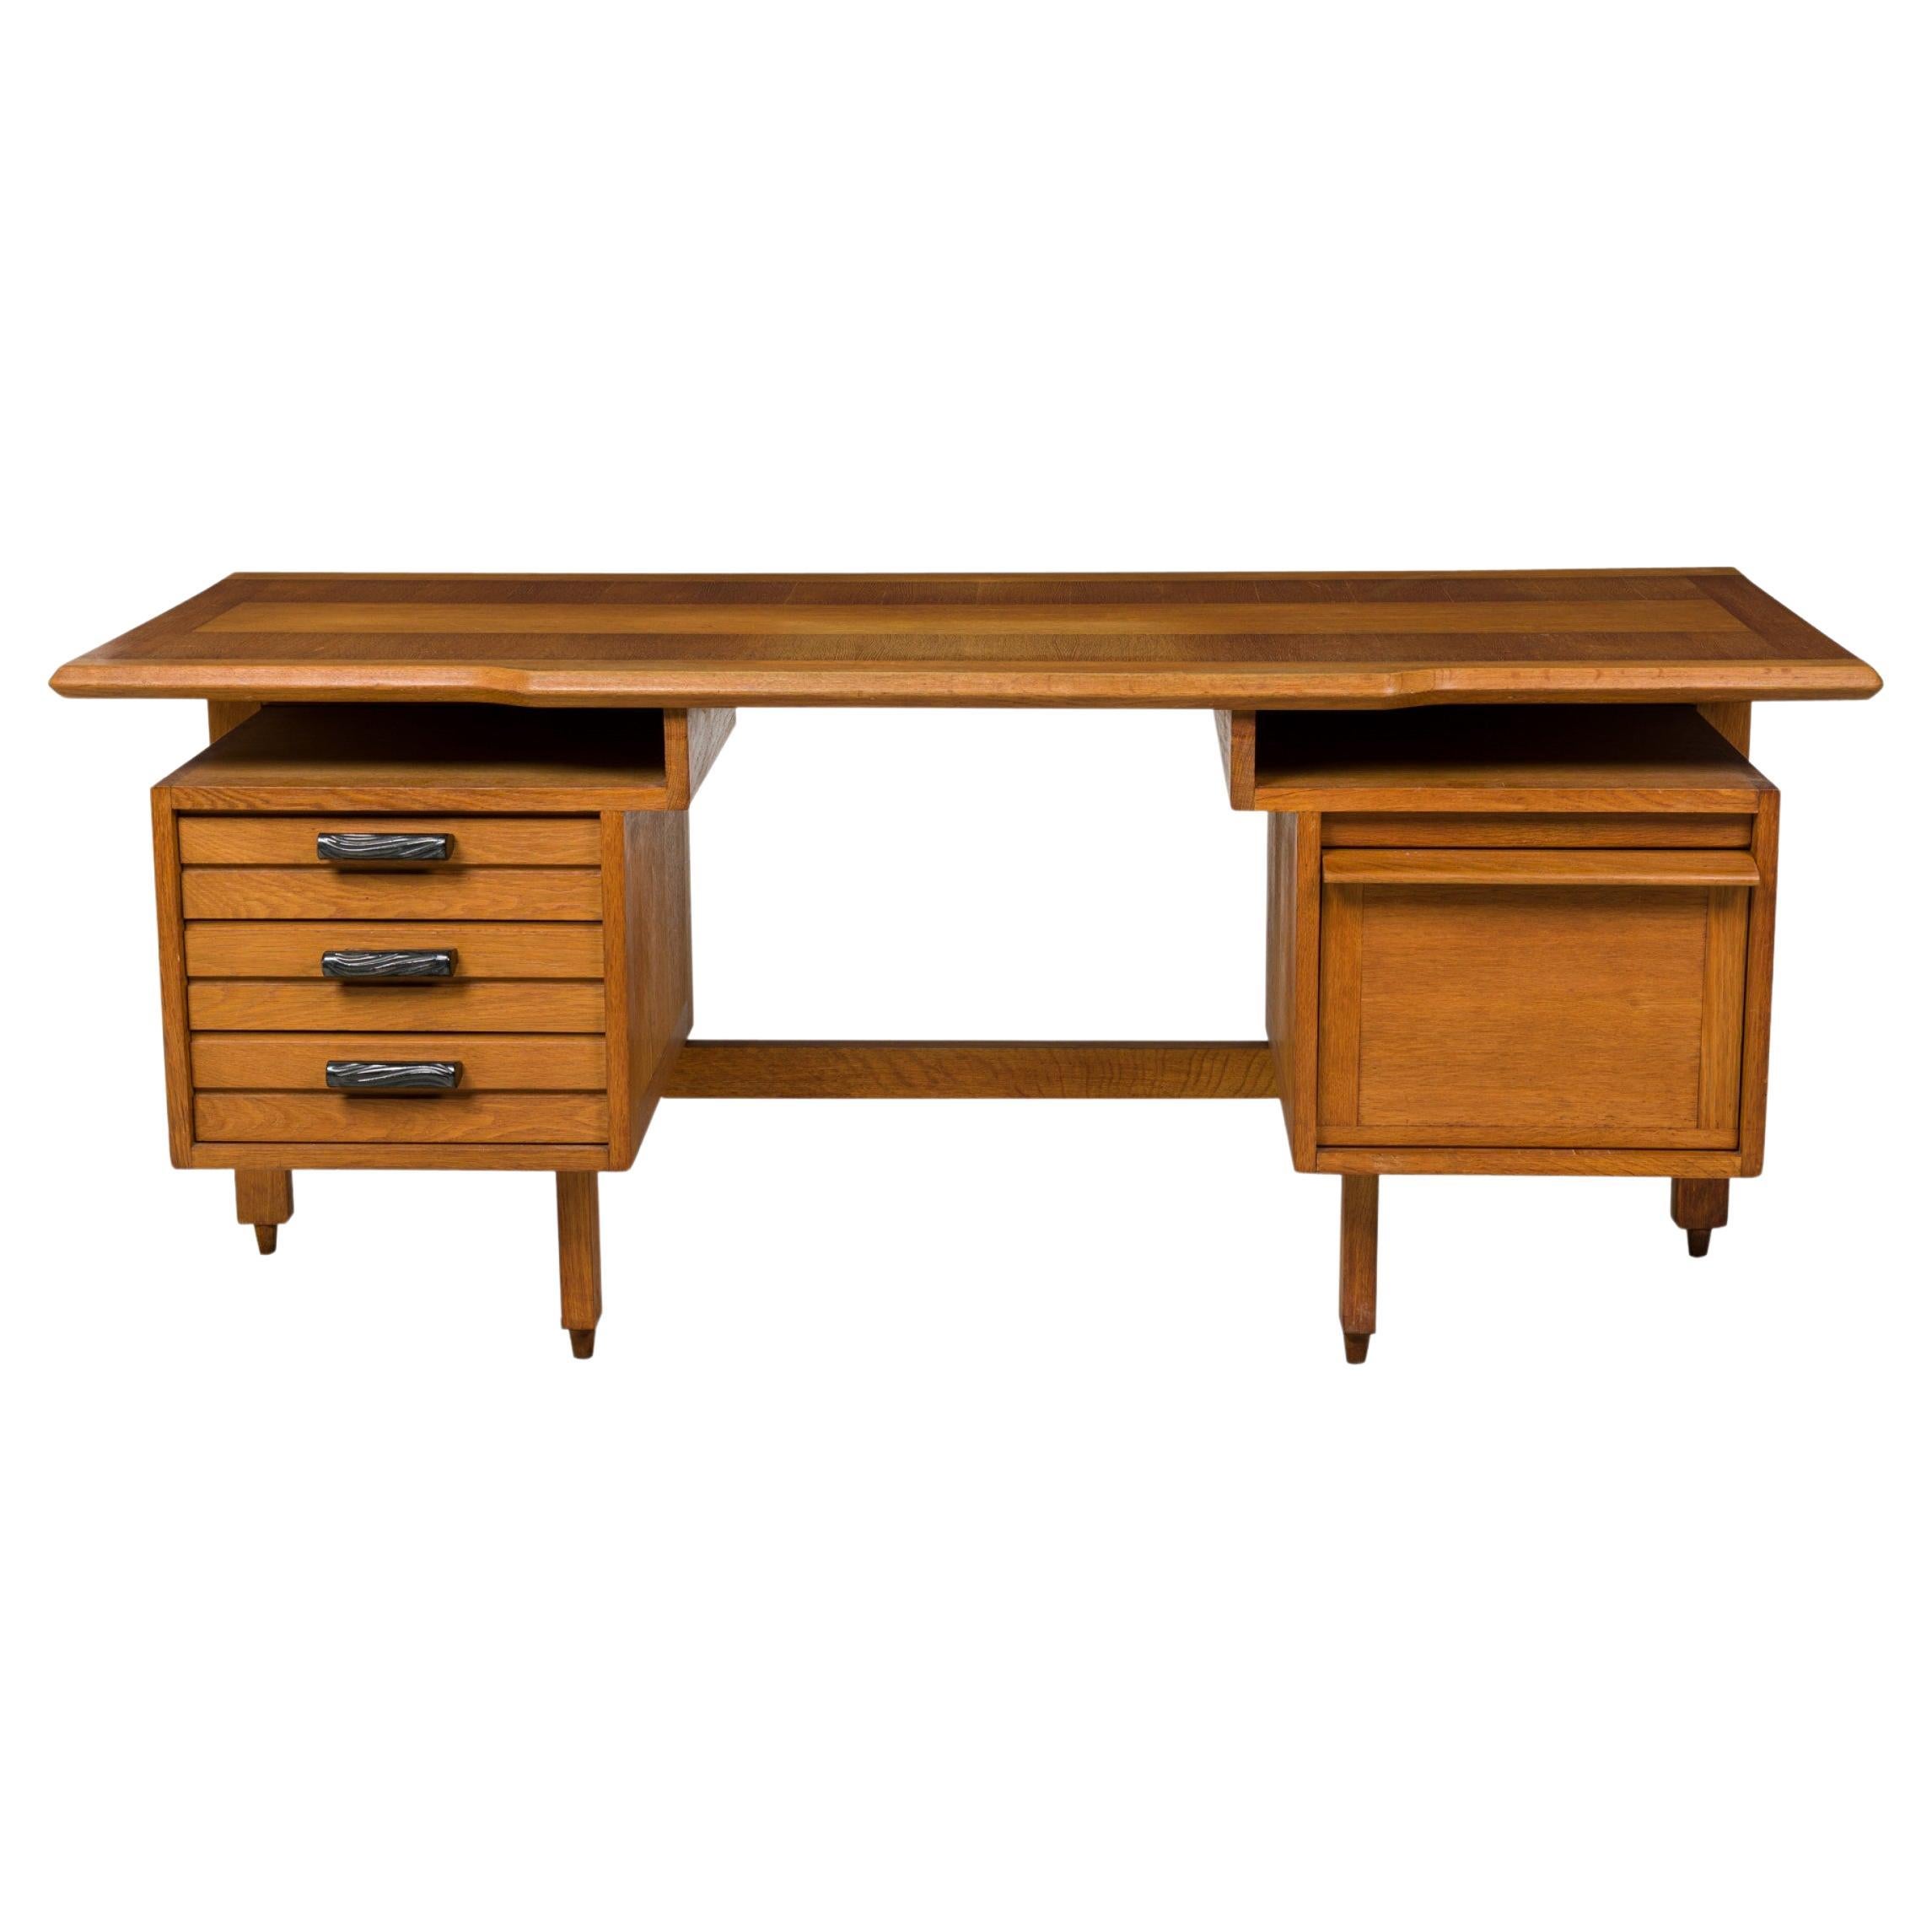 Guillerme & Chambron Midcentury French Large Oak Desk For Sale